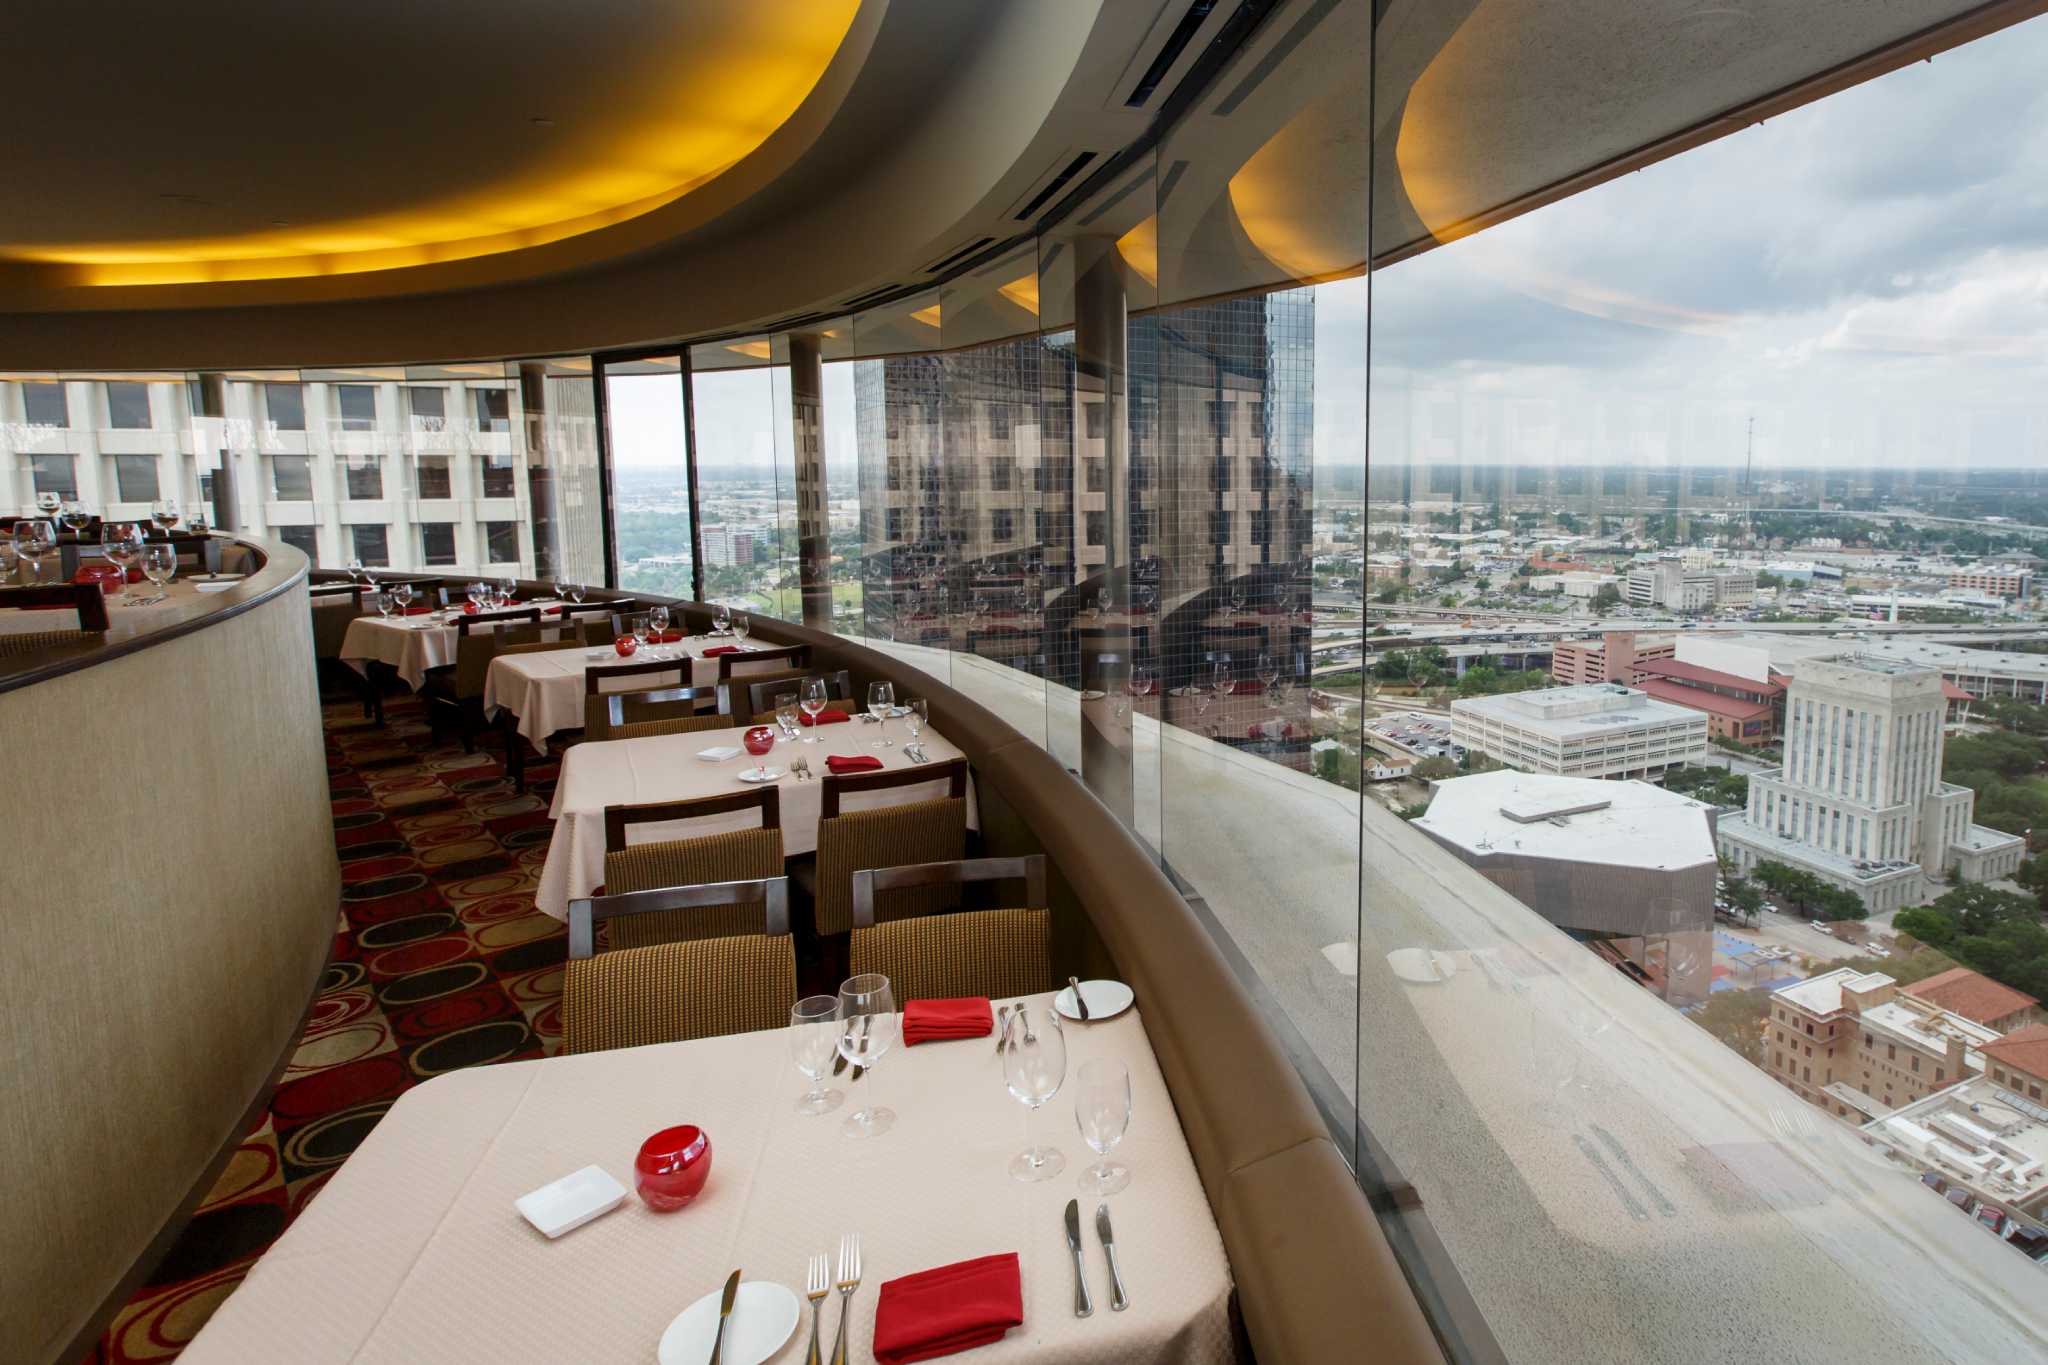 OpenTable names Spindletop Houston's most scenic restaurant